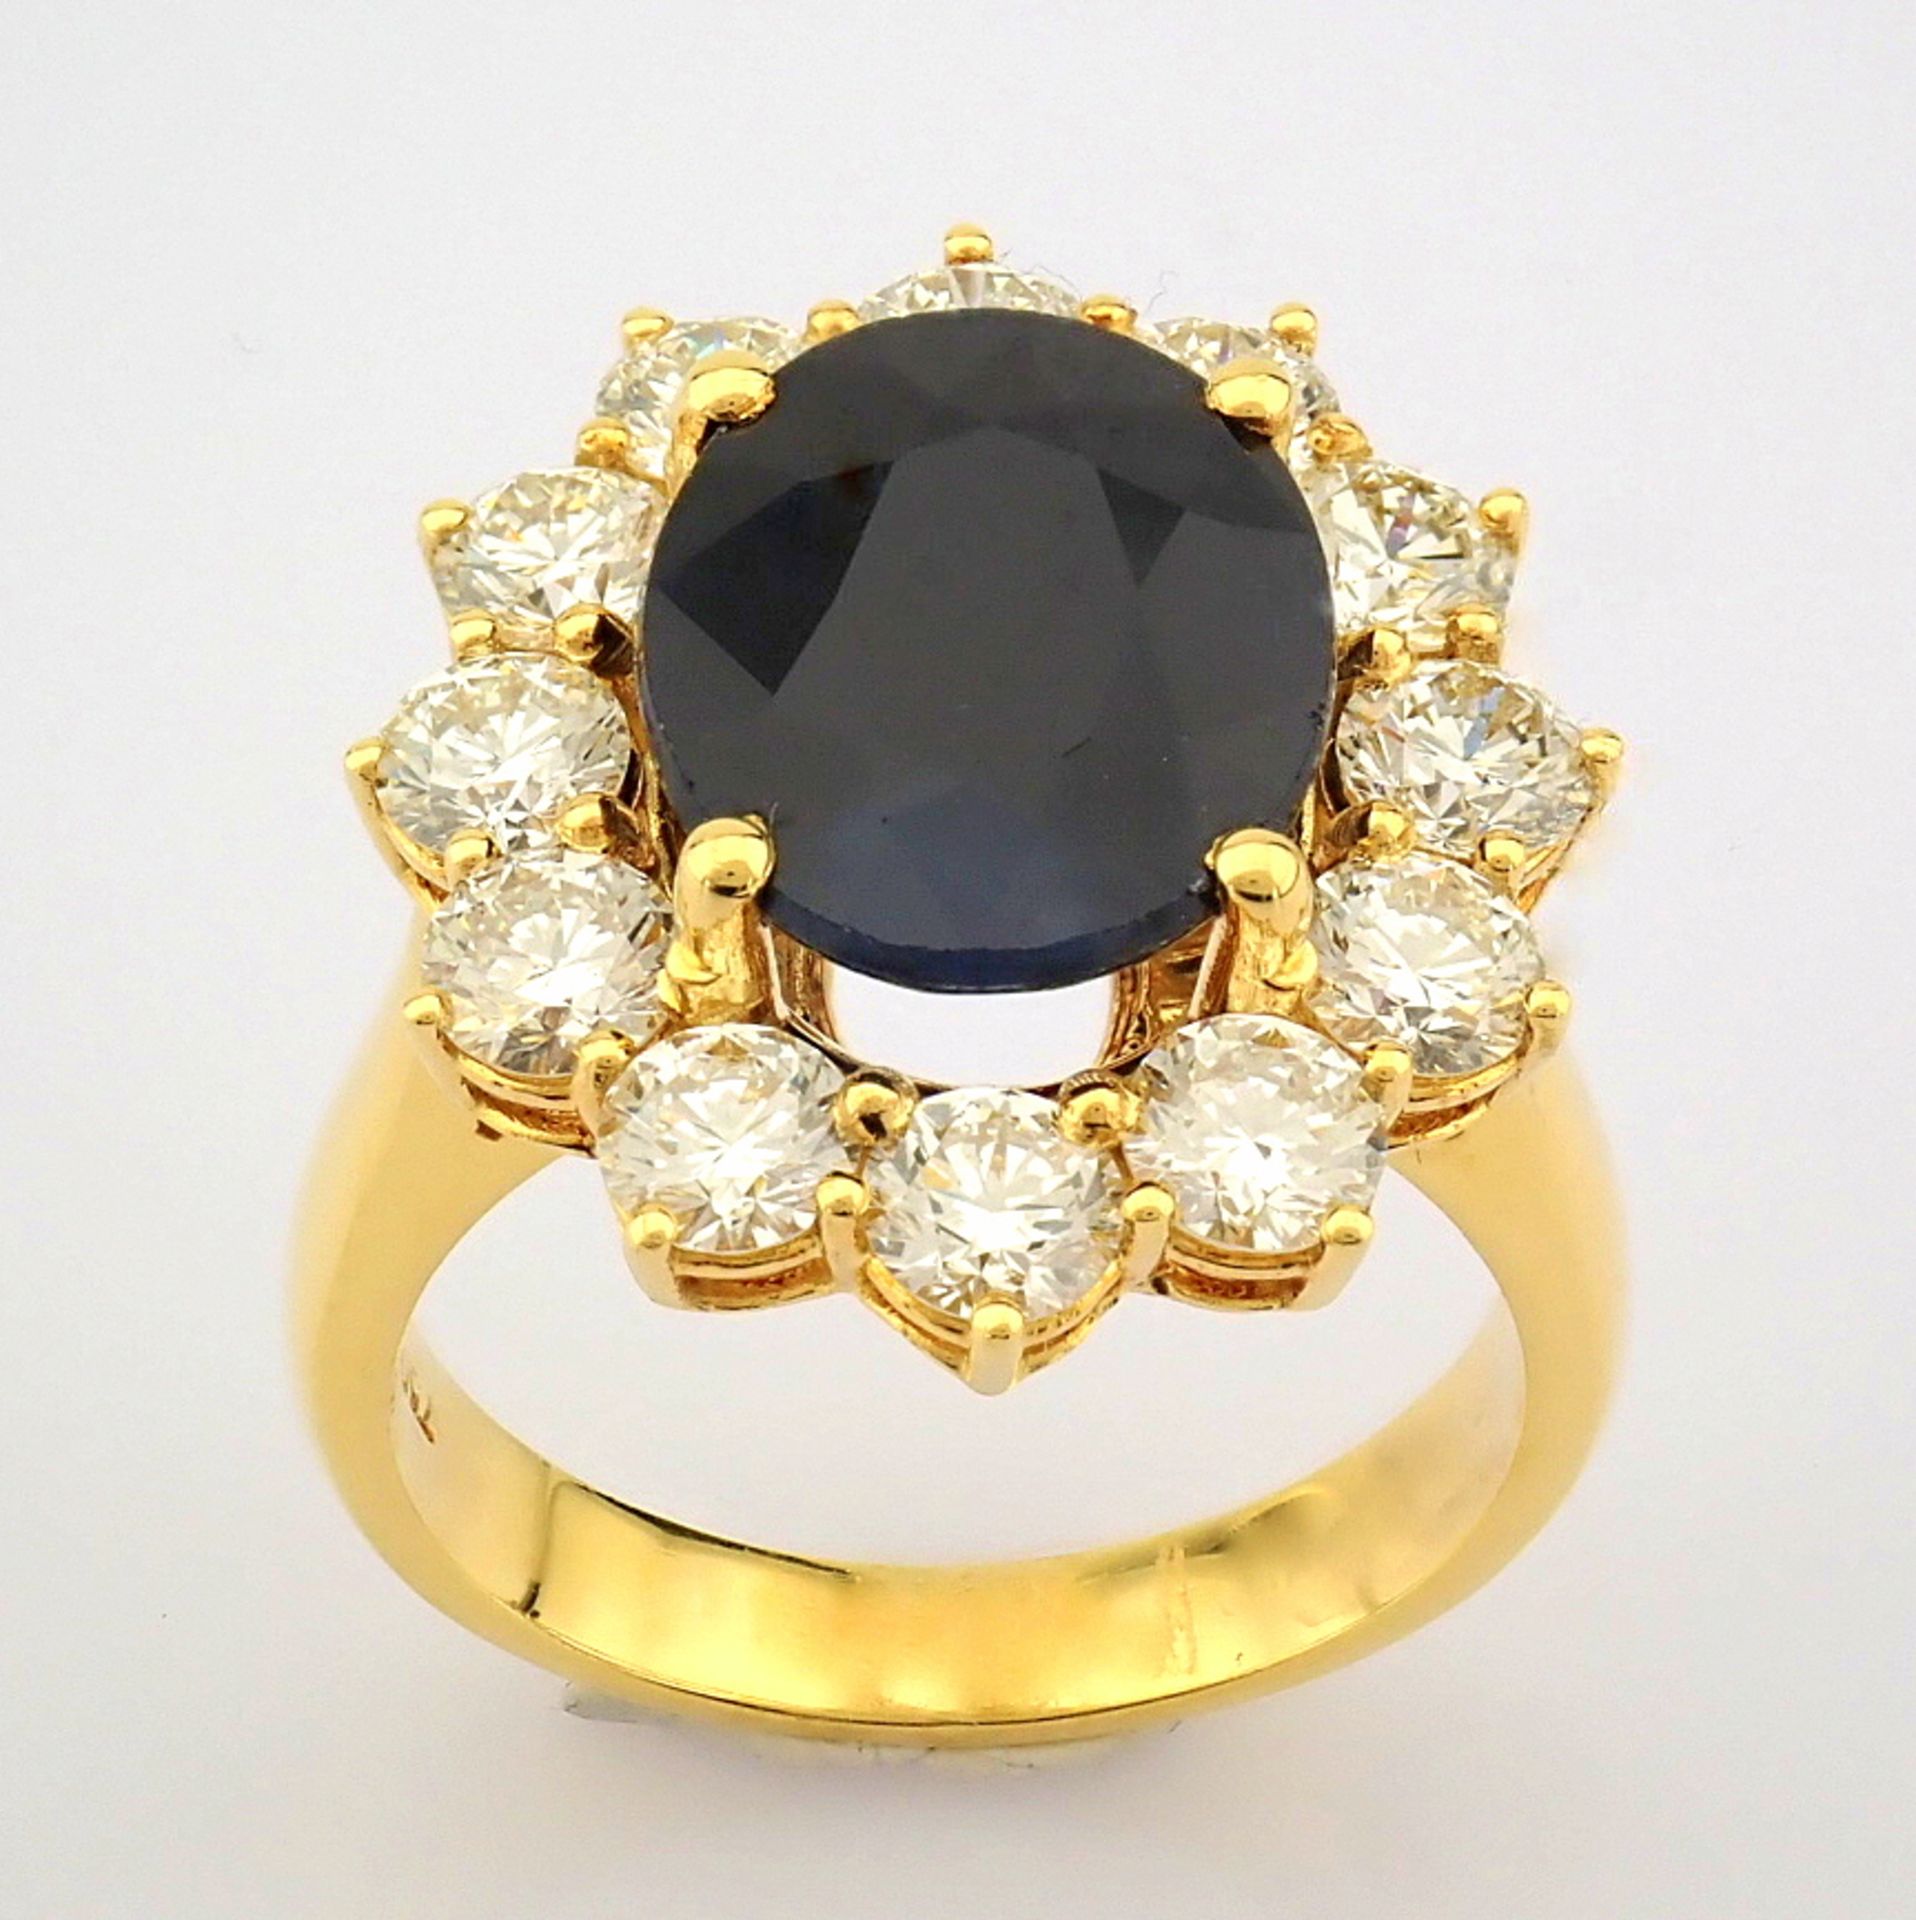 Certificated 18K Yellow Gold Sapphire & Diamond Ring (Total 8.14 ct Stone) - Image 2 of 8